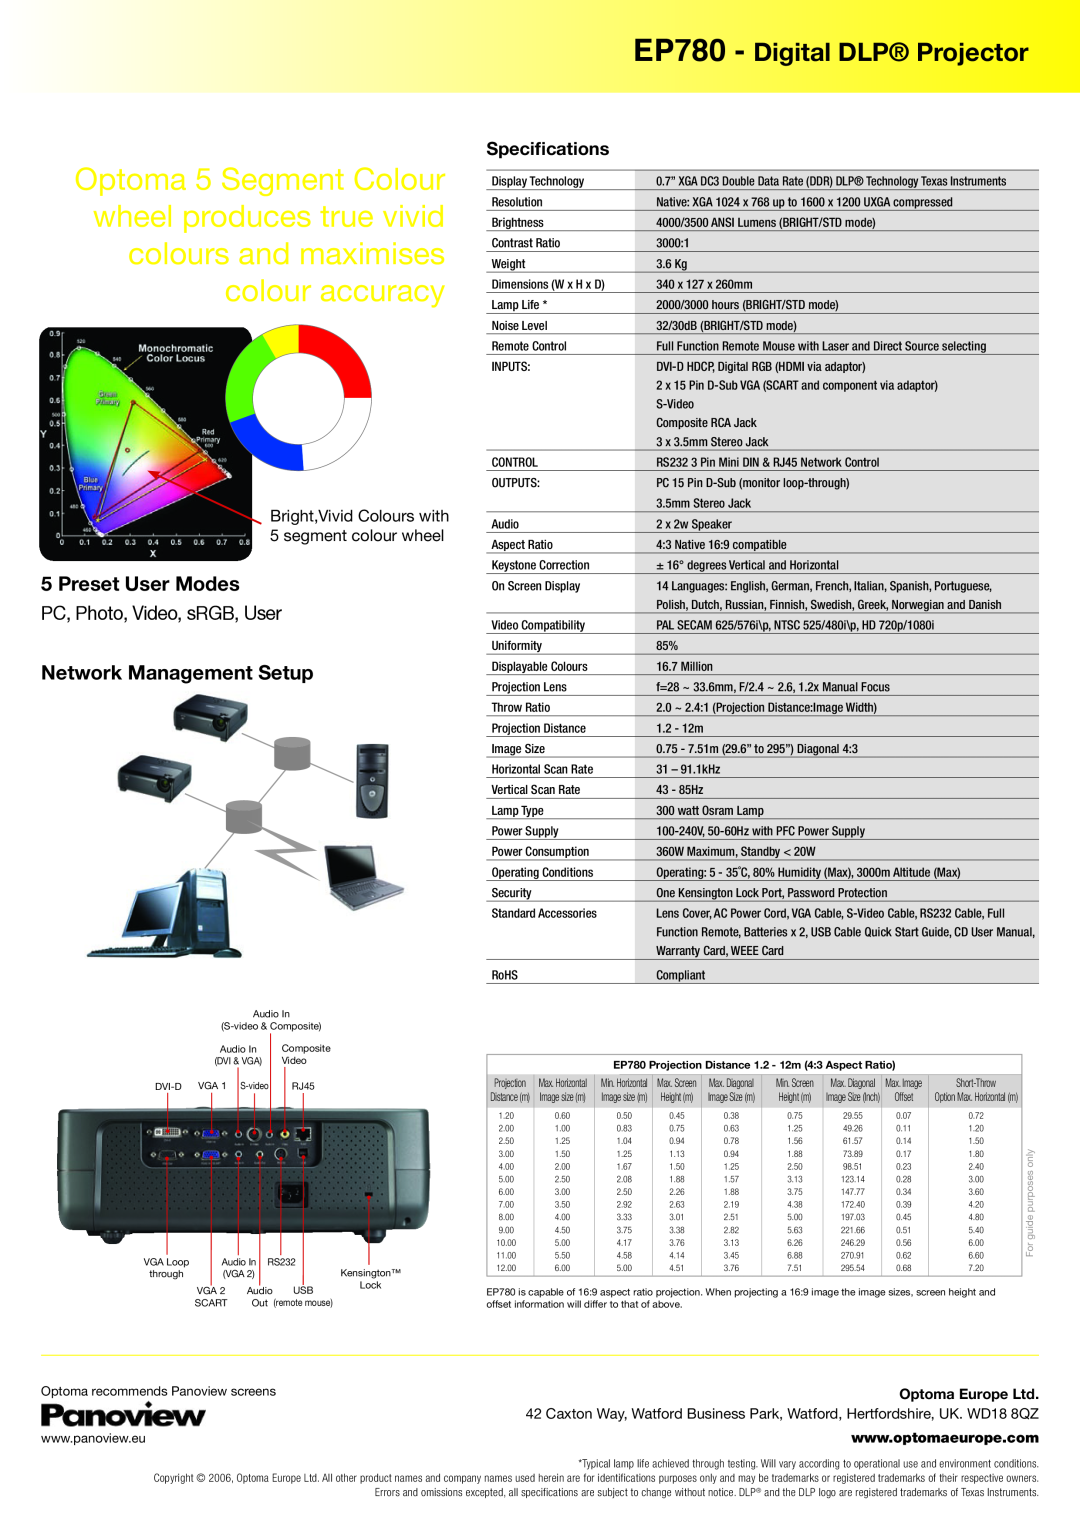 Texas Instruments ep780 EP780 - Digital DLP Projector, Preset User Modes, PC, Photo, Video, sRGB, User, Speciﬁcations 